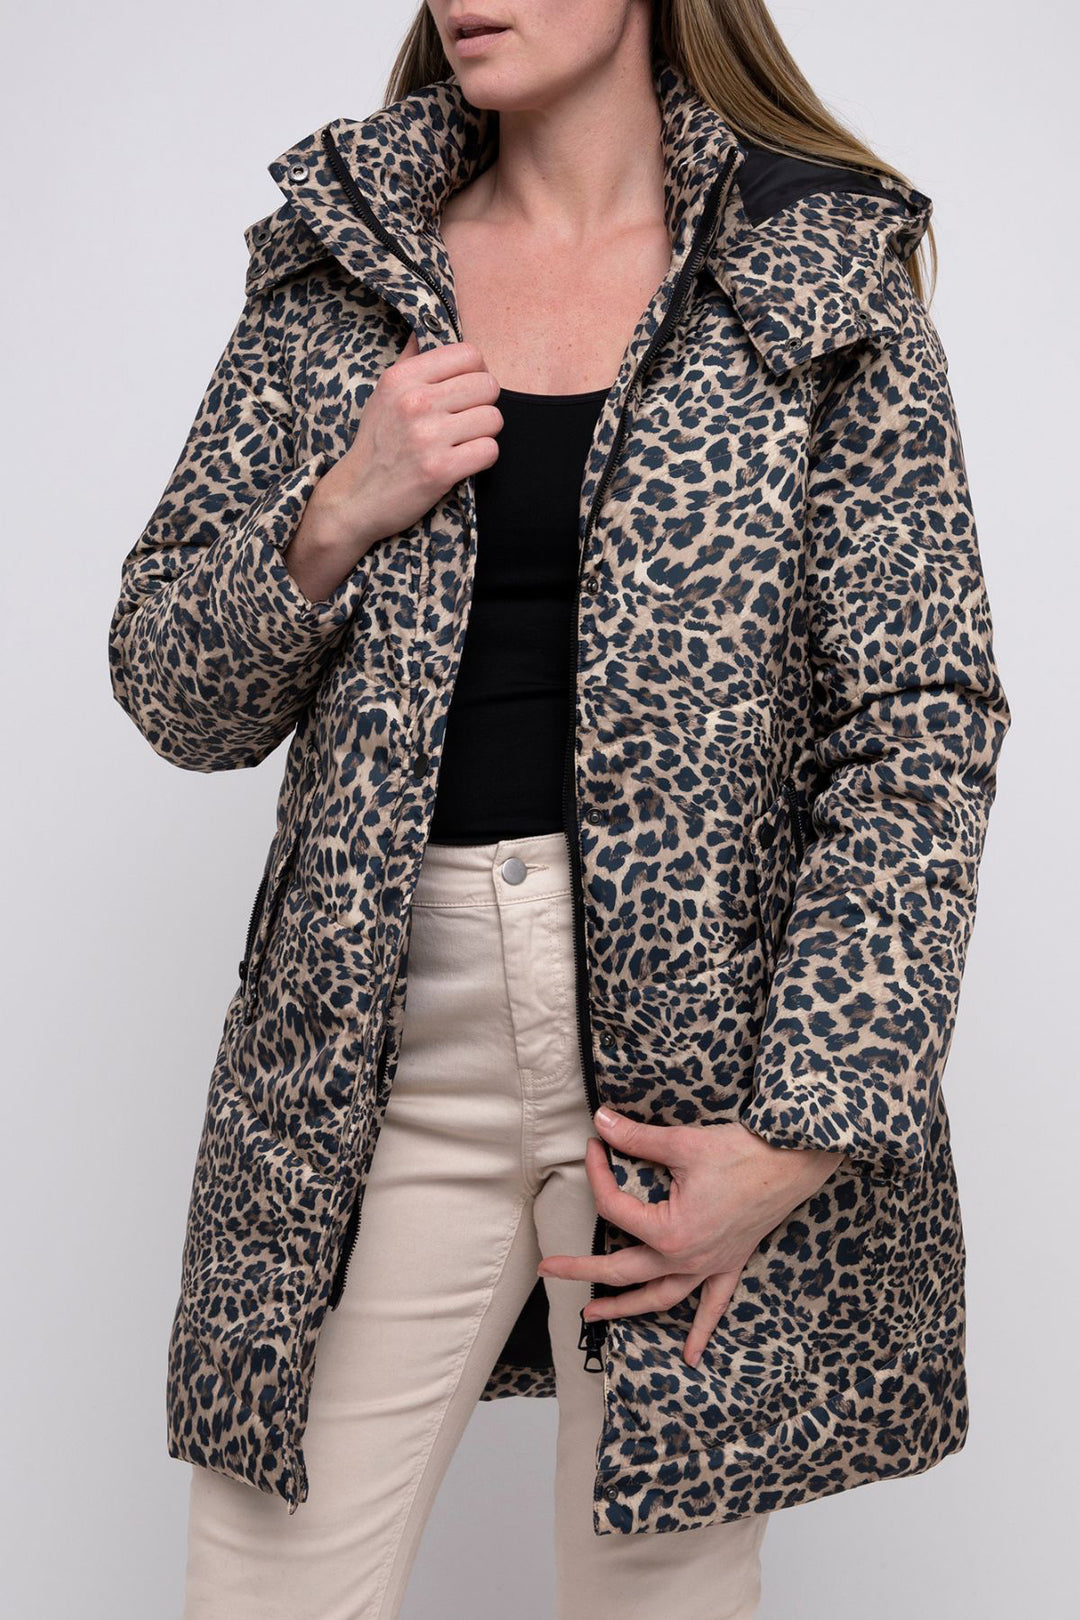 Woman wearing an animal puffer jacket by Pink Pong, sold and shipped from Pizazz Boutique Nelson Bay women's dresses online Australia front view